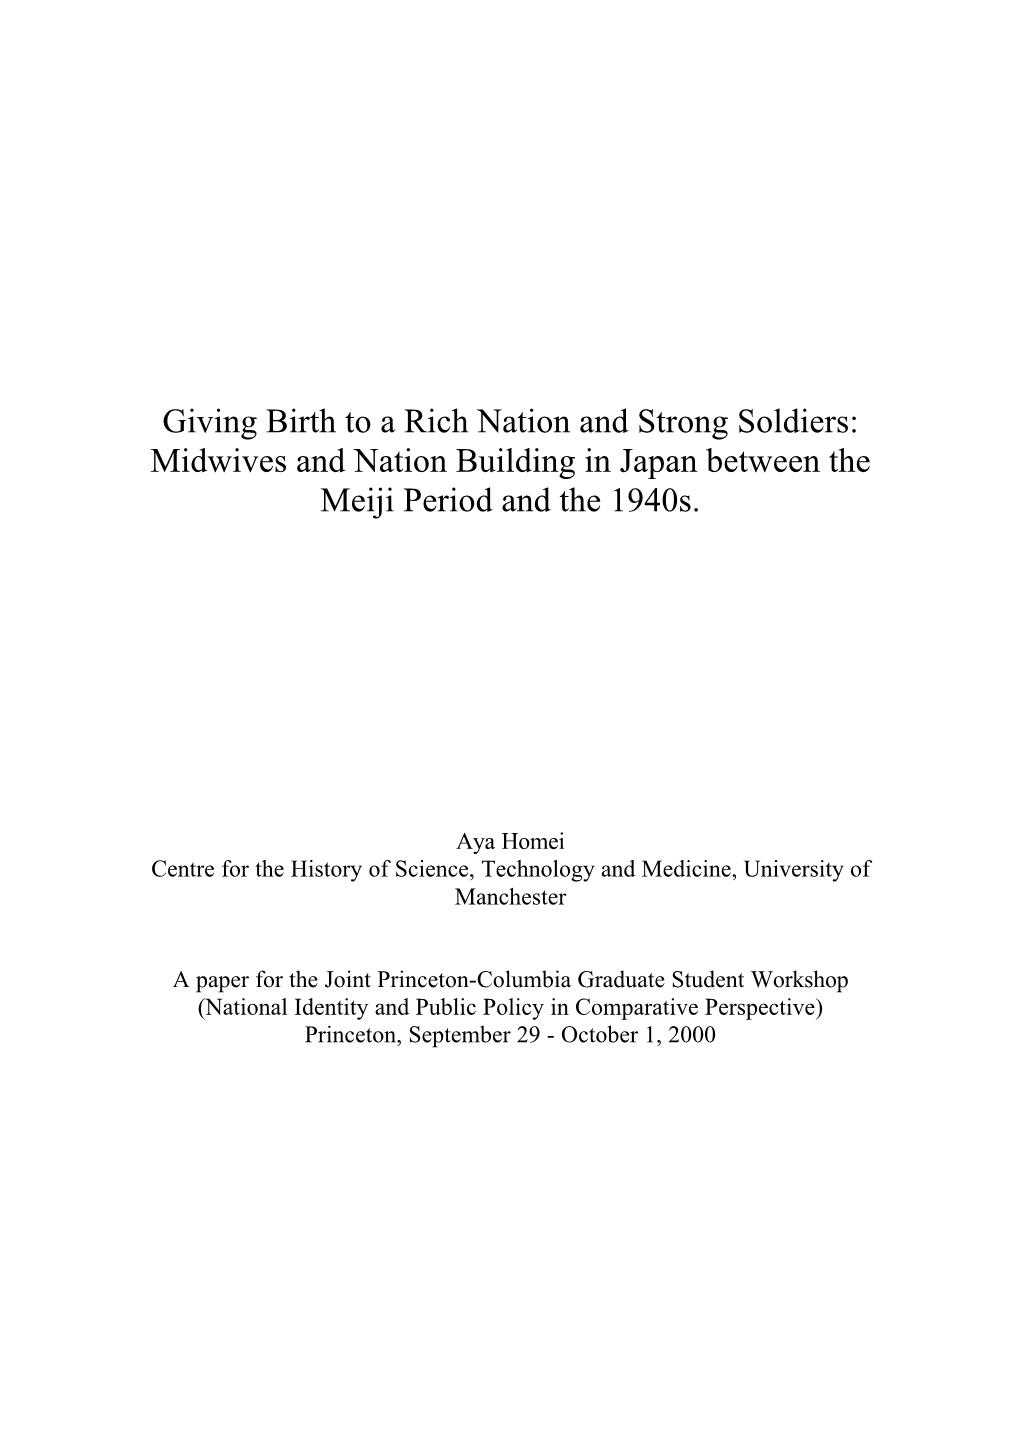 Giving Birth to a Rich Nation and Strong Soldiers: Midwives and Nation Building in Japan Between the Meiji Period and the 1940S